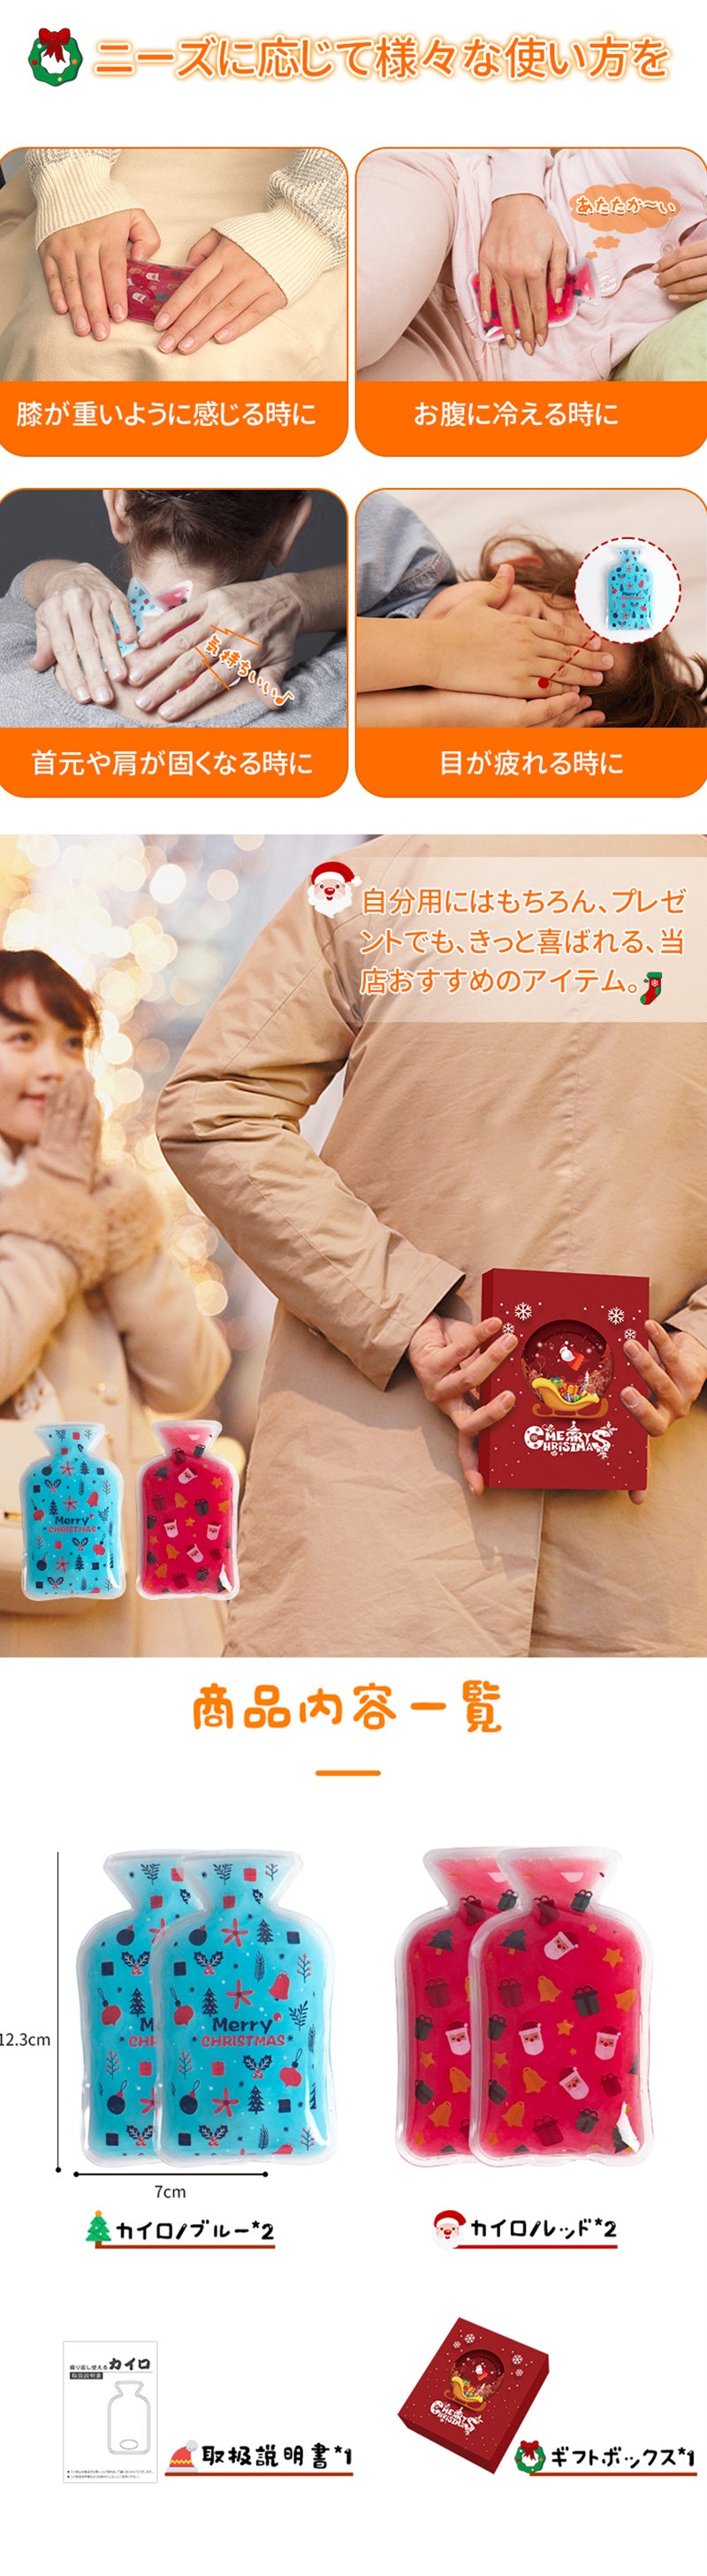 Eco warmer Reusable pocket warmer Hand warmer Hot warmer Non-stick Cute Warm Easy to carry Children Women Men Kids Mini warmer Cute Prize Prize Goods Gift Present Cold weather protection Cold protection goods Small gift Present